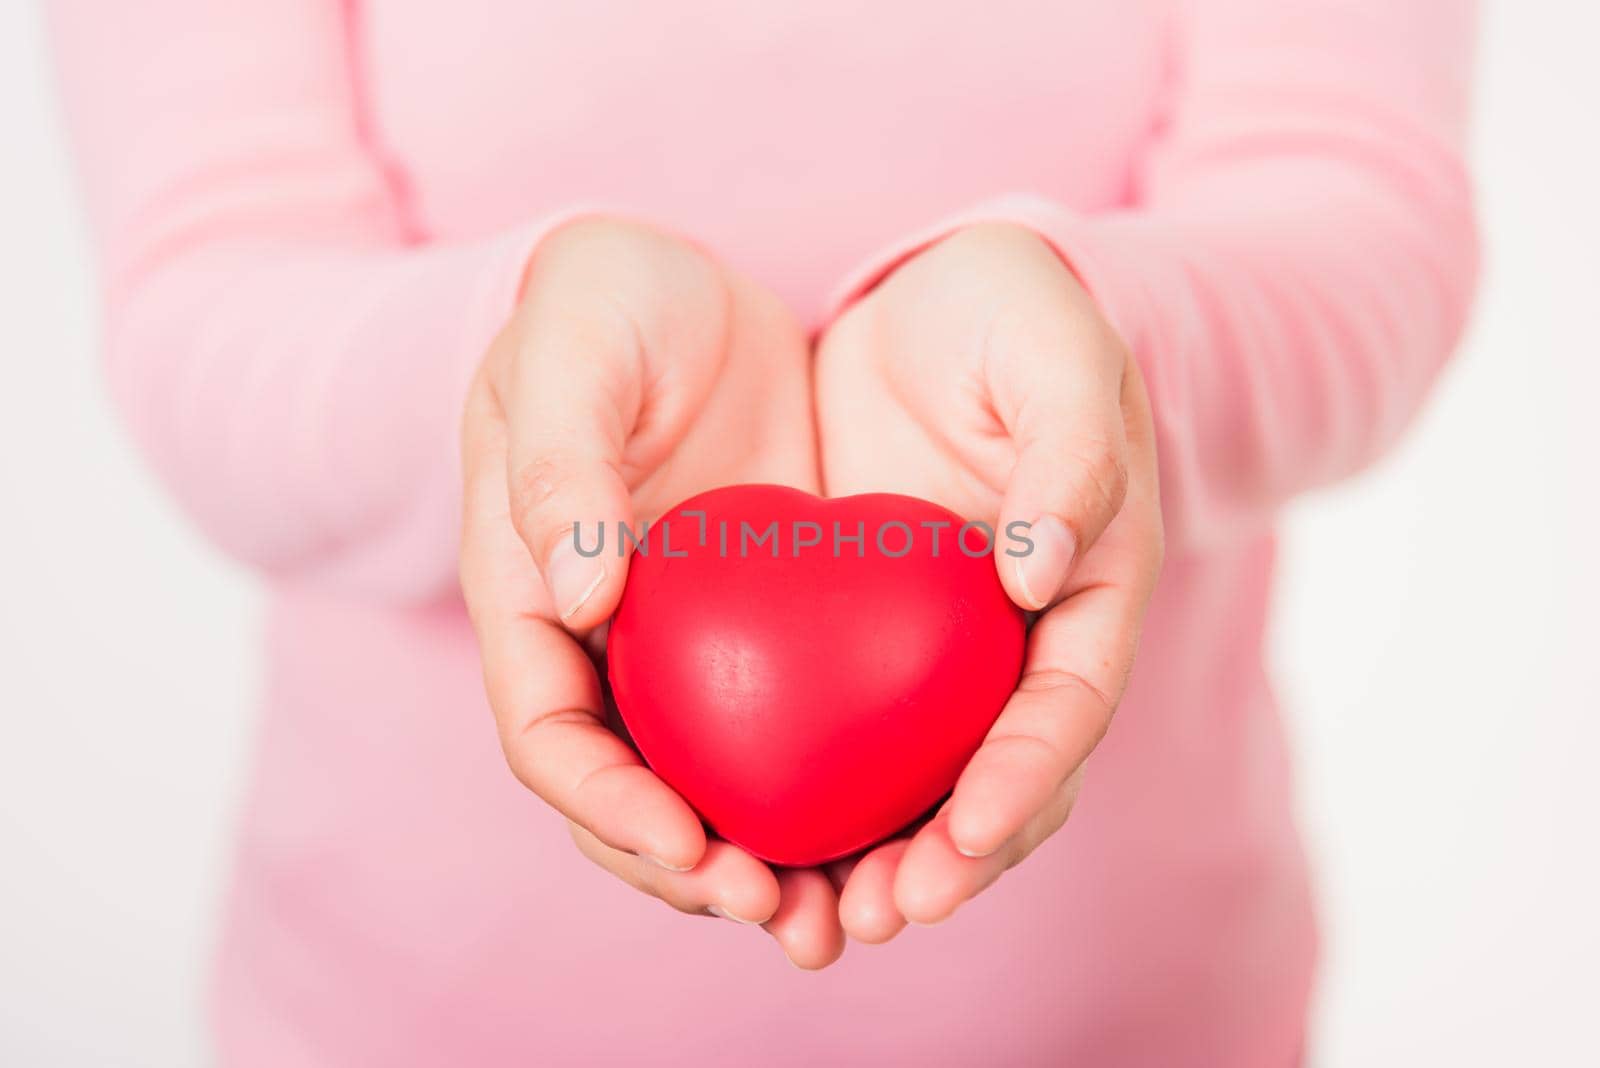 Love Valentine's Day. Woman beauty hands holding red heart for giving help donation medical healthcare concept isolated on white background, holiday background concept